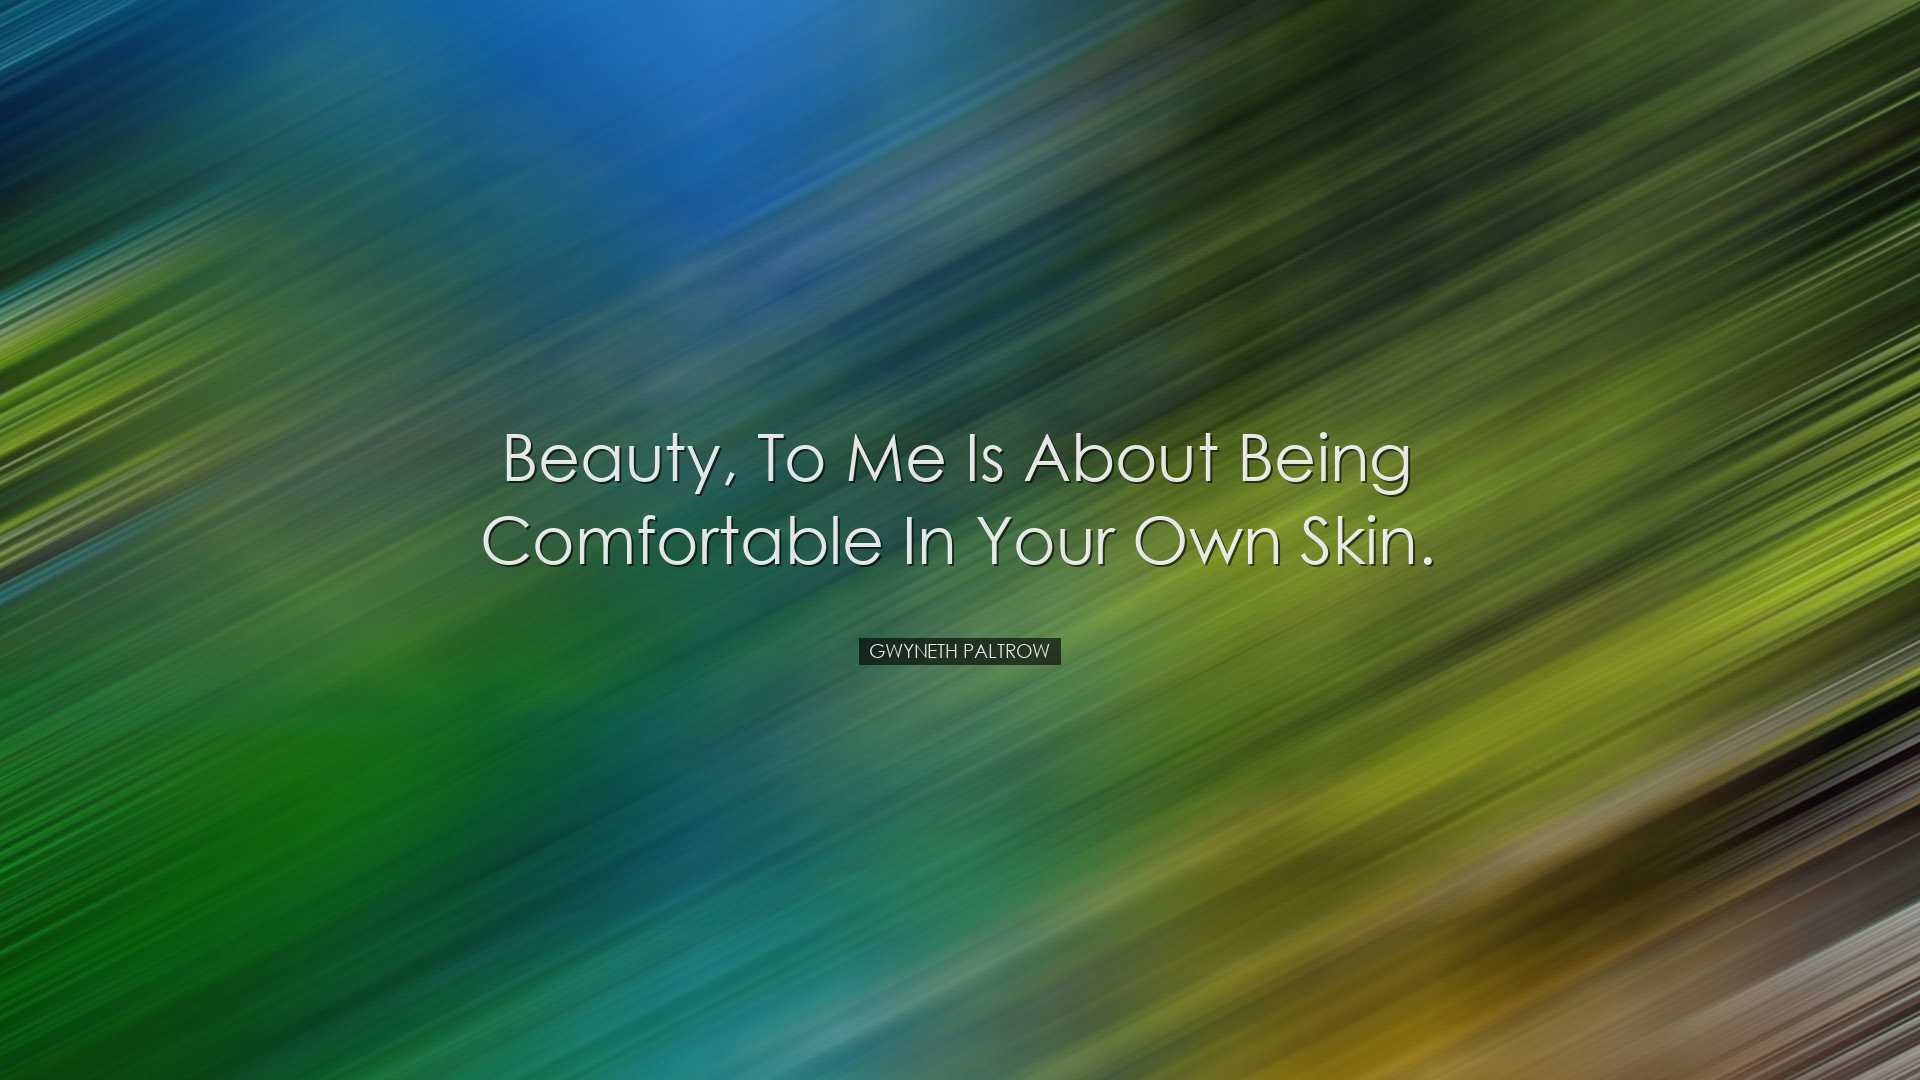 Beauty, to me is about being comfortable in your own skin. - Gwyne